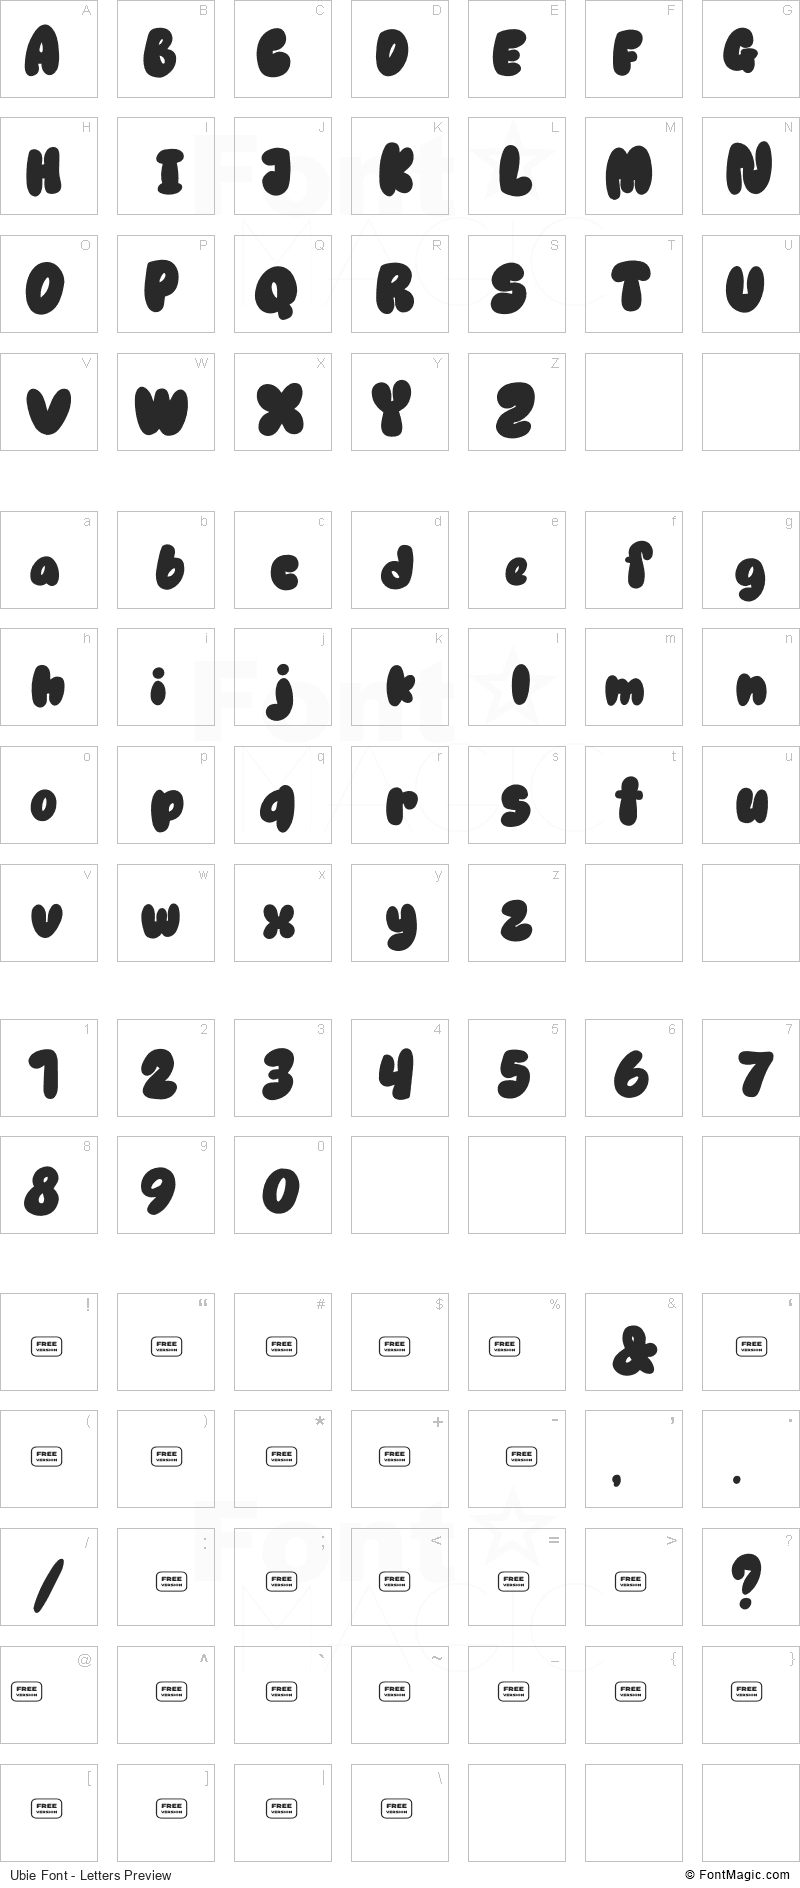 Ubie Font - All Latters Preview Chart